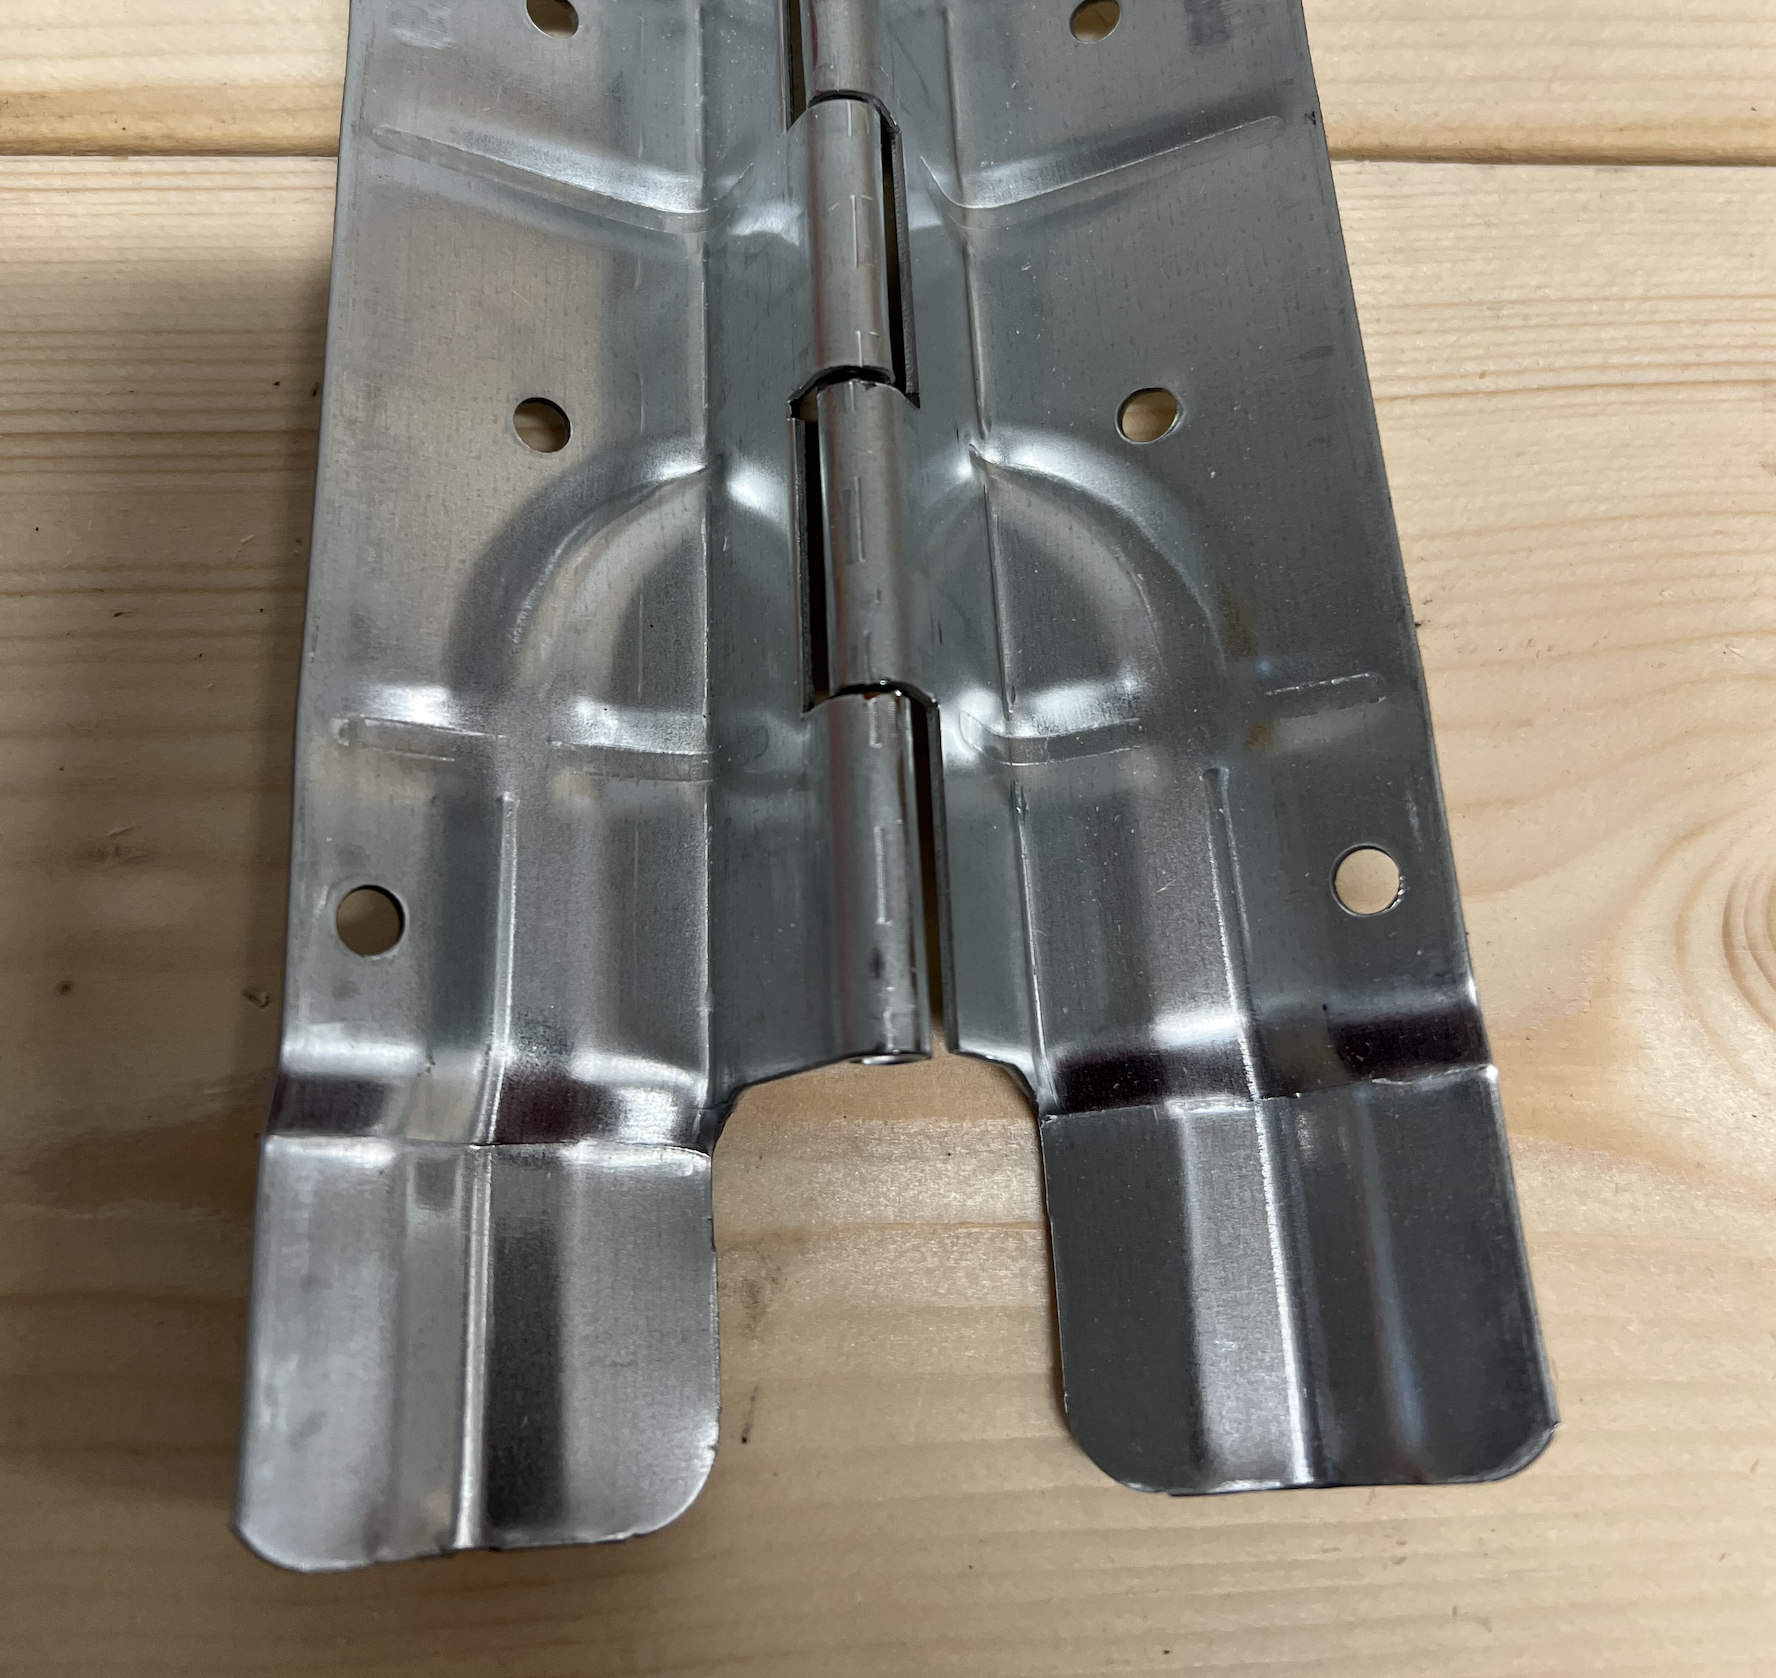 buy metal pallet collar hinges online in canada shop order with direct to consumer shipping through canada post